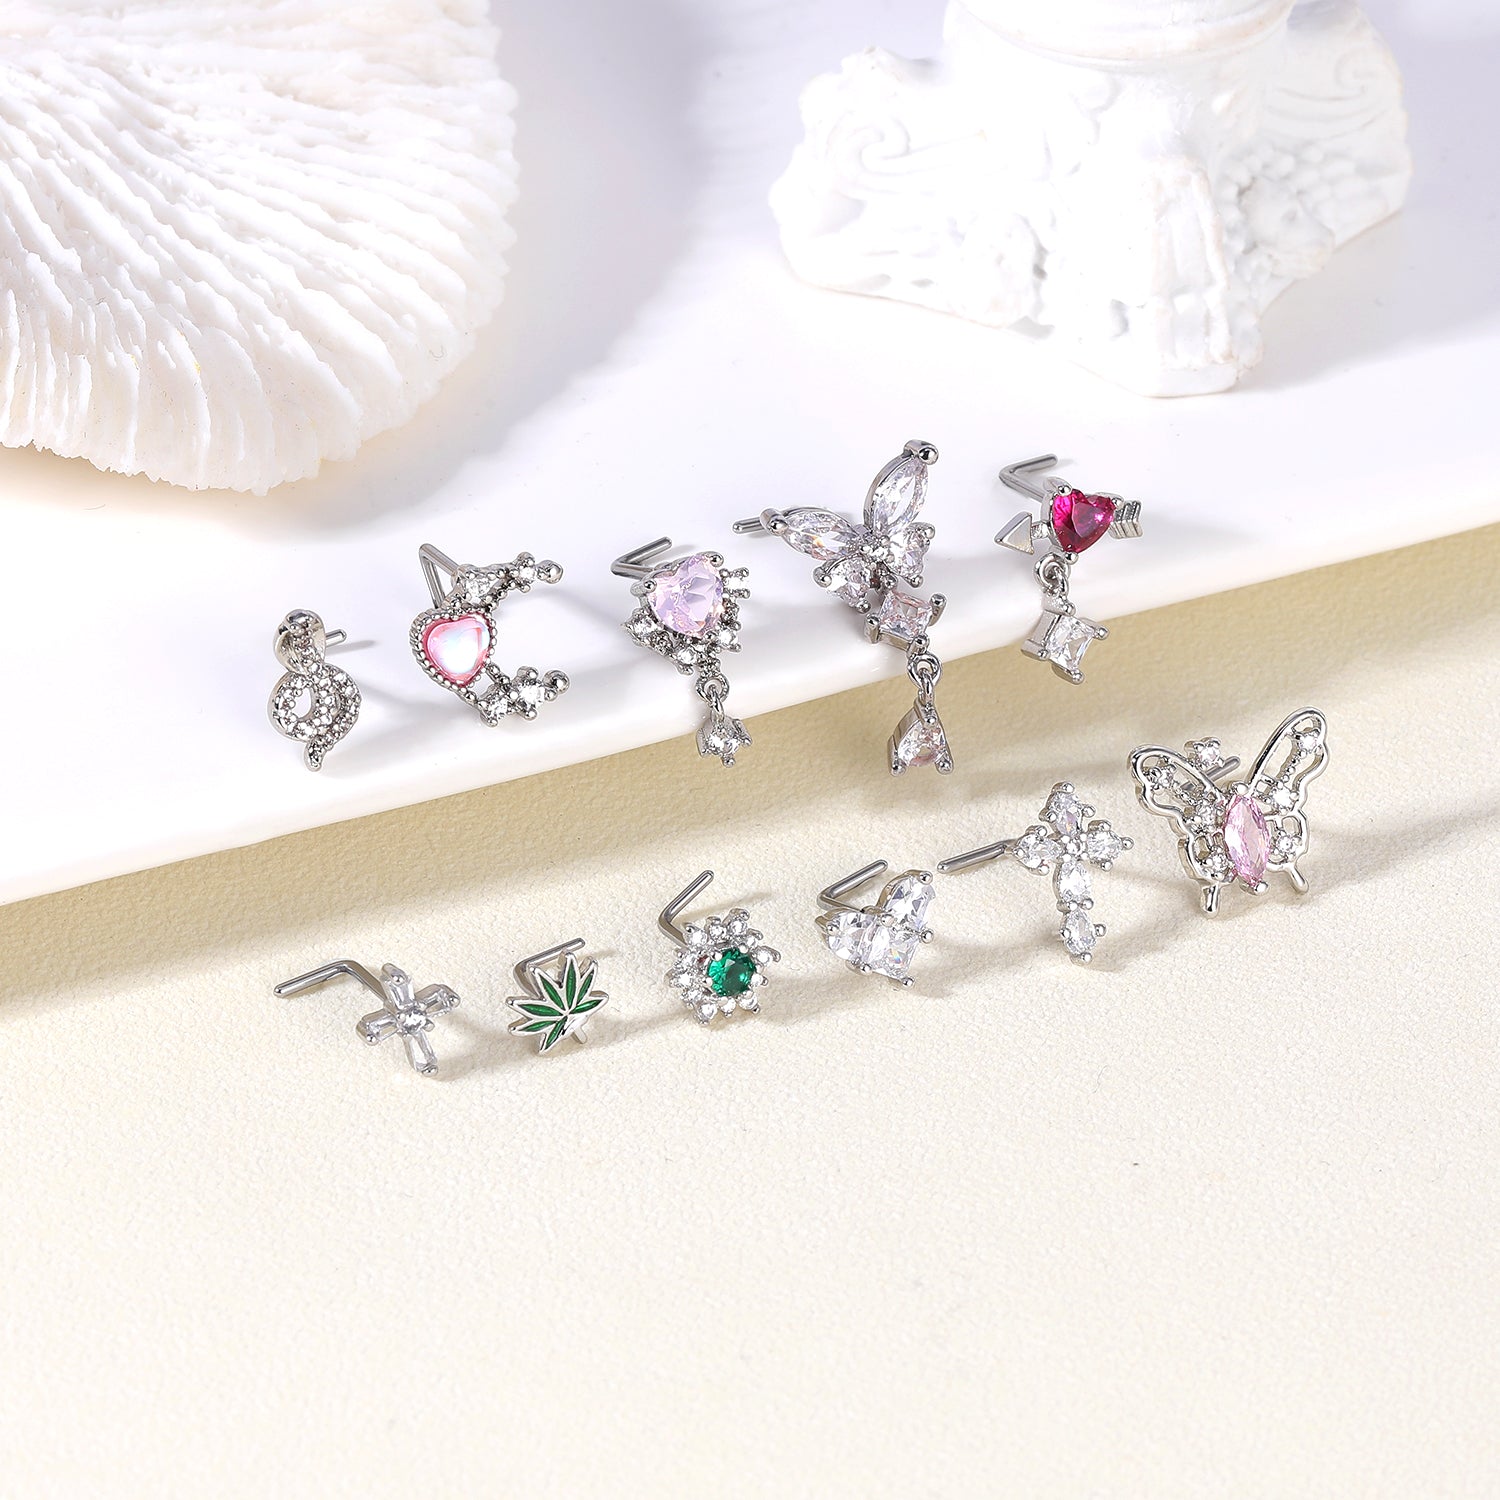 20G-White-Zircon-Nose-Studs-Piercing-L-Shape-Butterfly-Nose-Rings-Gold-Silver-Plated-Nostril-Piercing